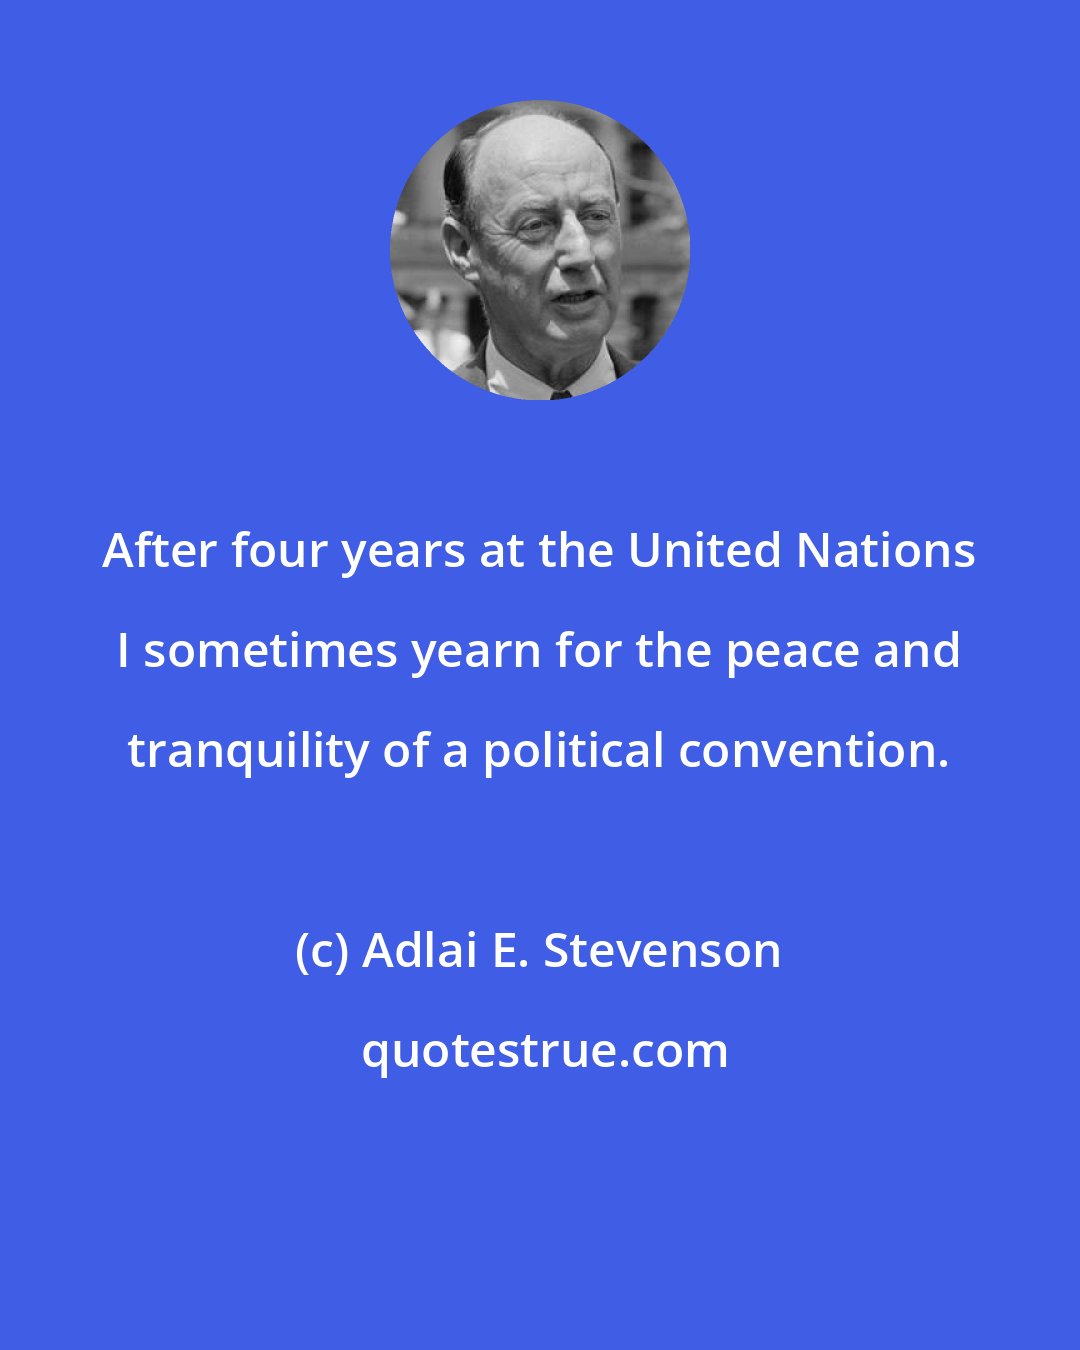 Adlai E. Stevenson: After four years at the United Nations I sometimes yearn for the peace and tranquility of a political convention.